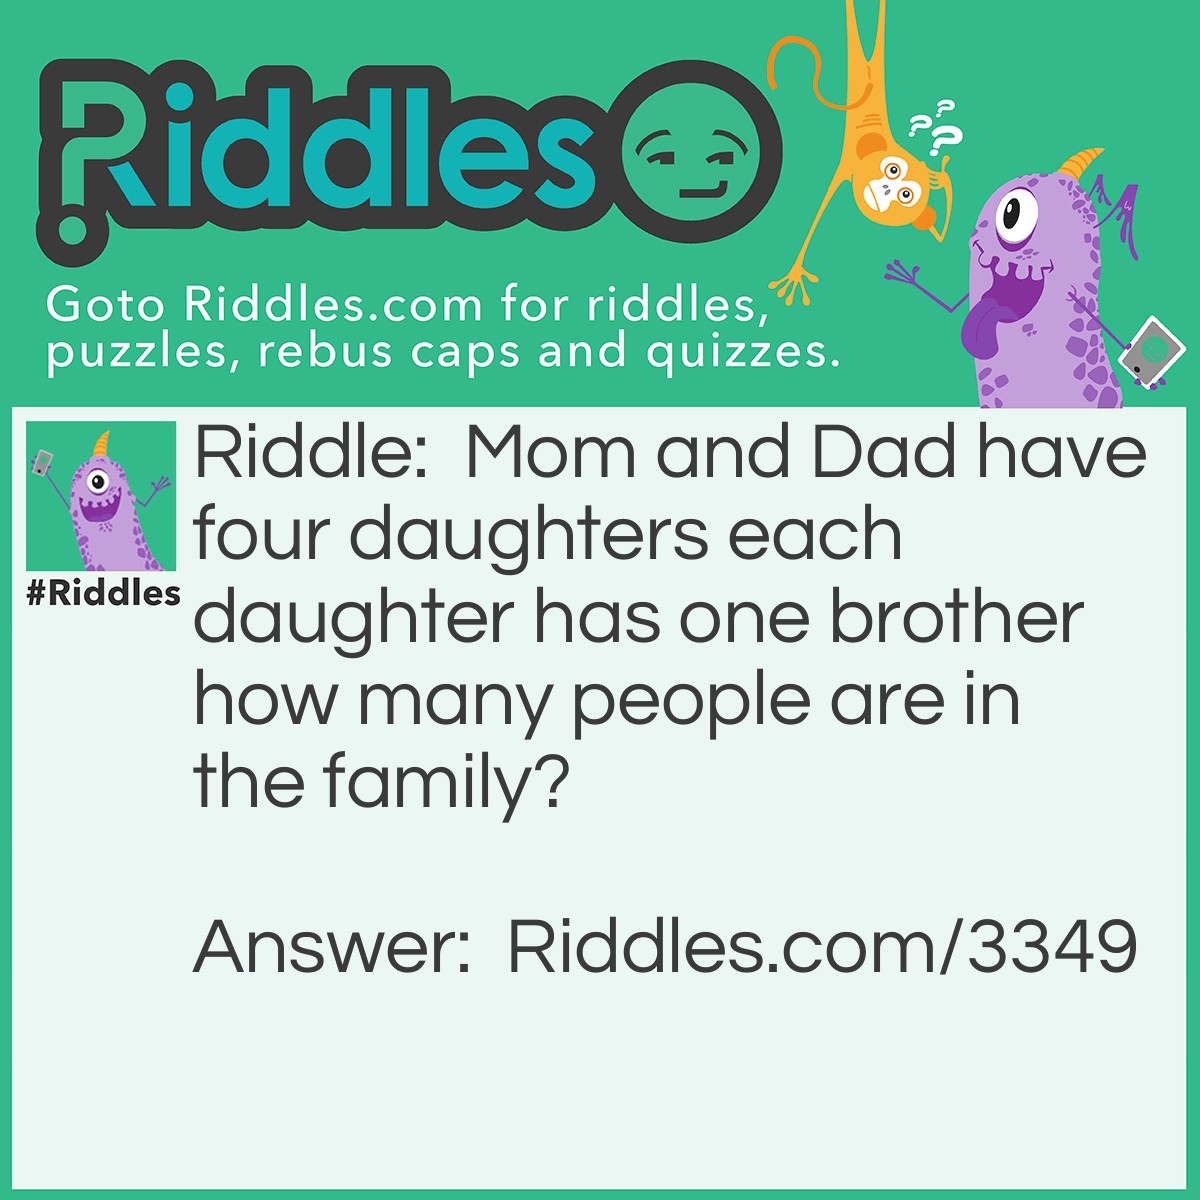 Riddle: Mom and Dad have four daughters each daughter has one brother how many people are in the family? Answer: The answer is 7. Each daughter has one brother since the daughters are all sisters and there's one brother they all share the same brother. So, therefore, the answer is 7.